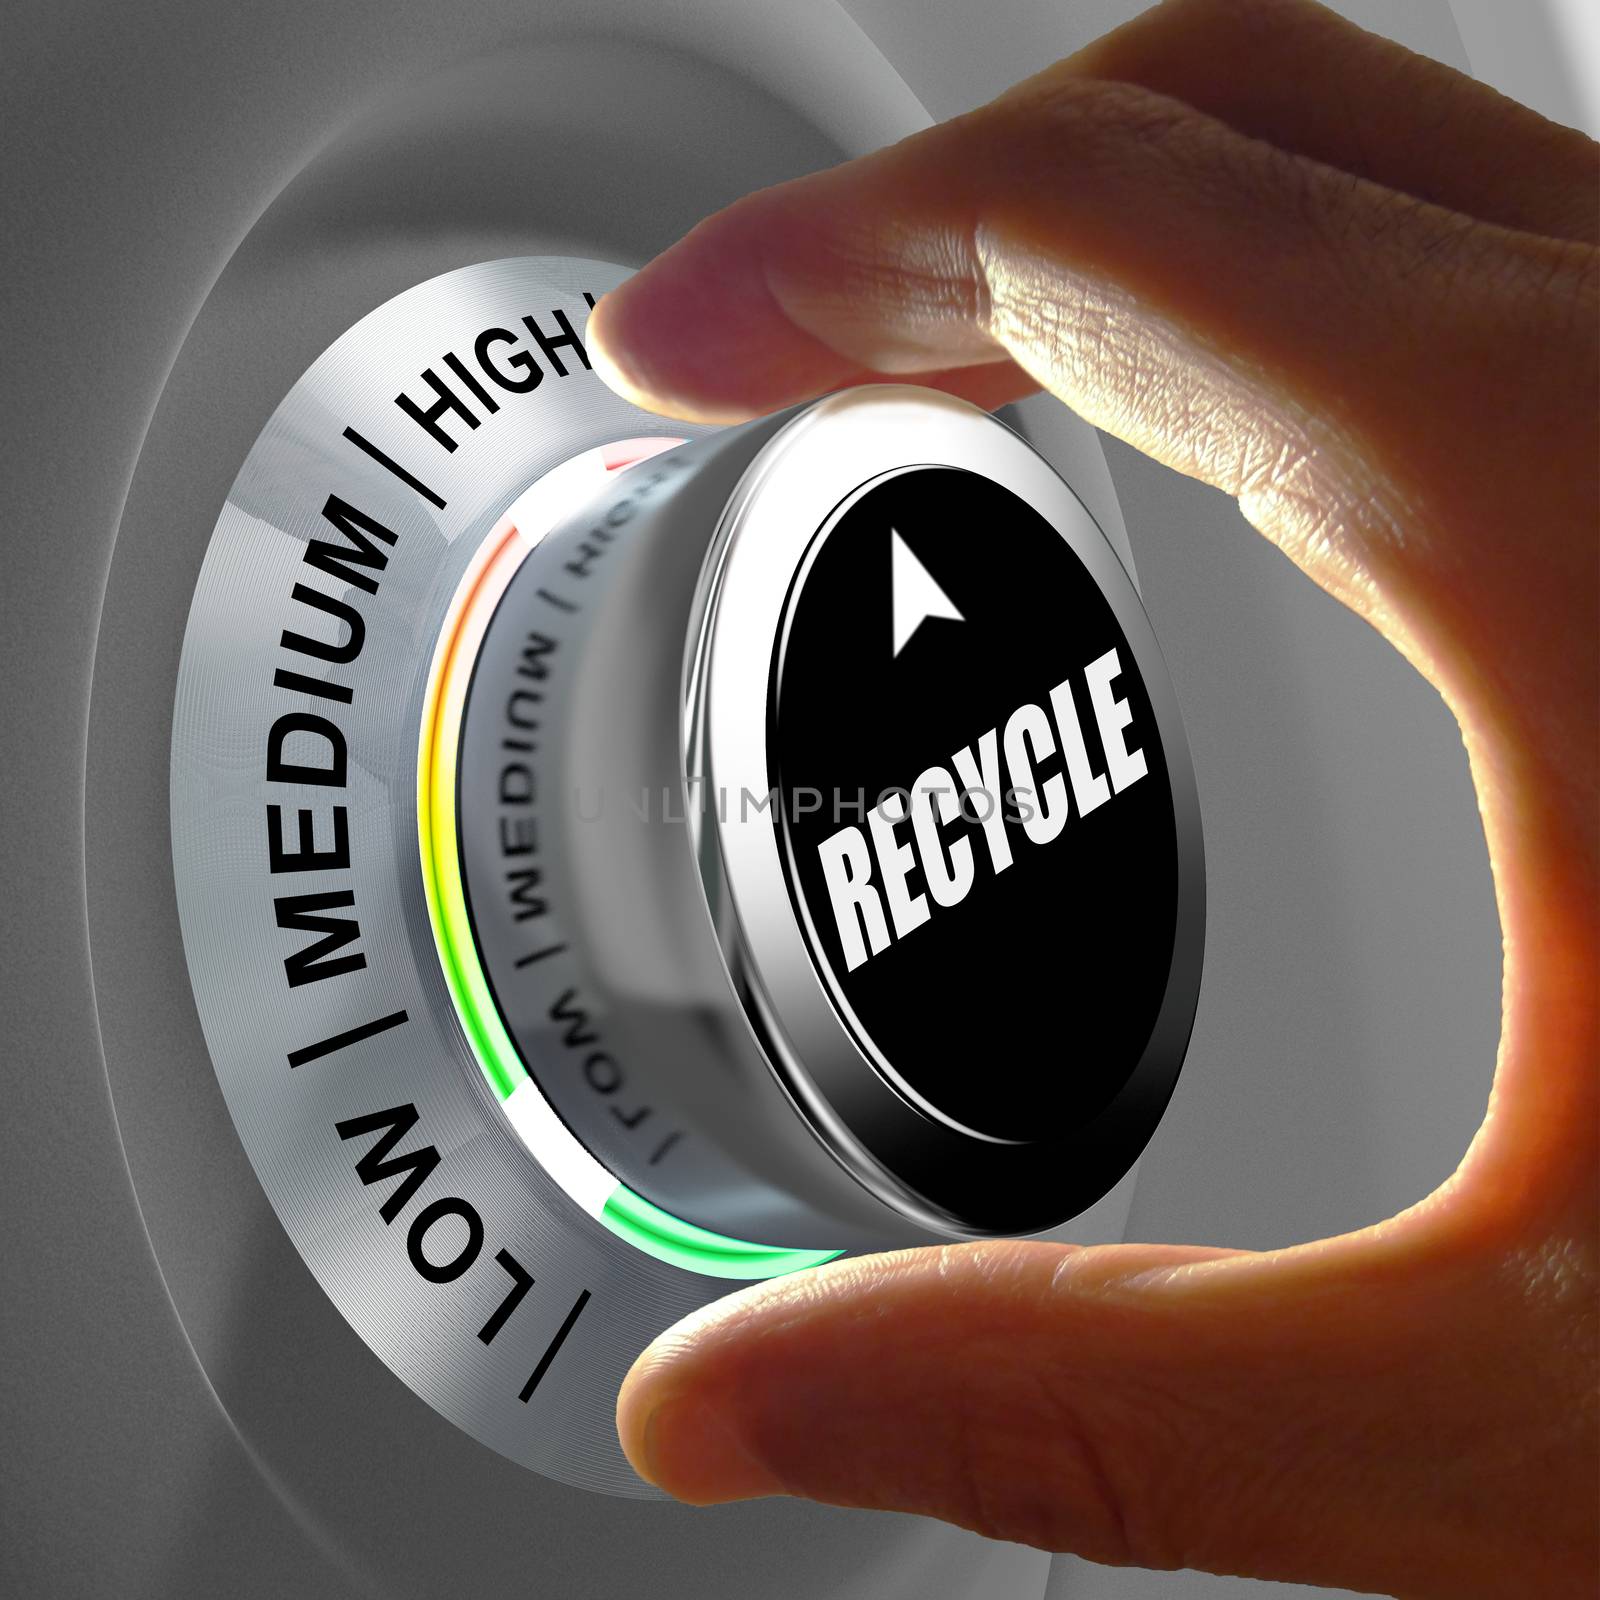 Hand rotating a button and selecting the level of recycling. This concept illustration is a metaphor for choosing the level of recycling. Three levels are available: low, medium and high.